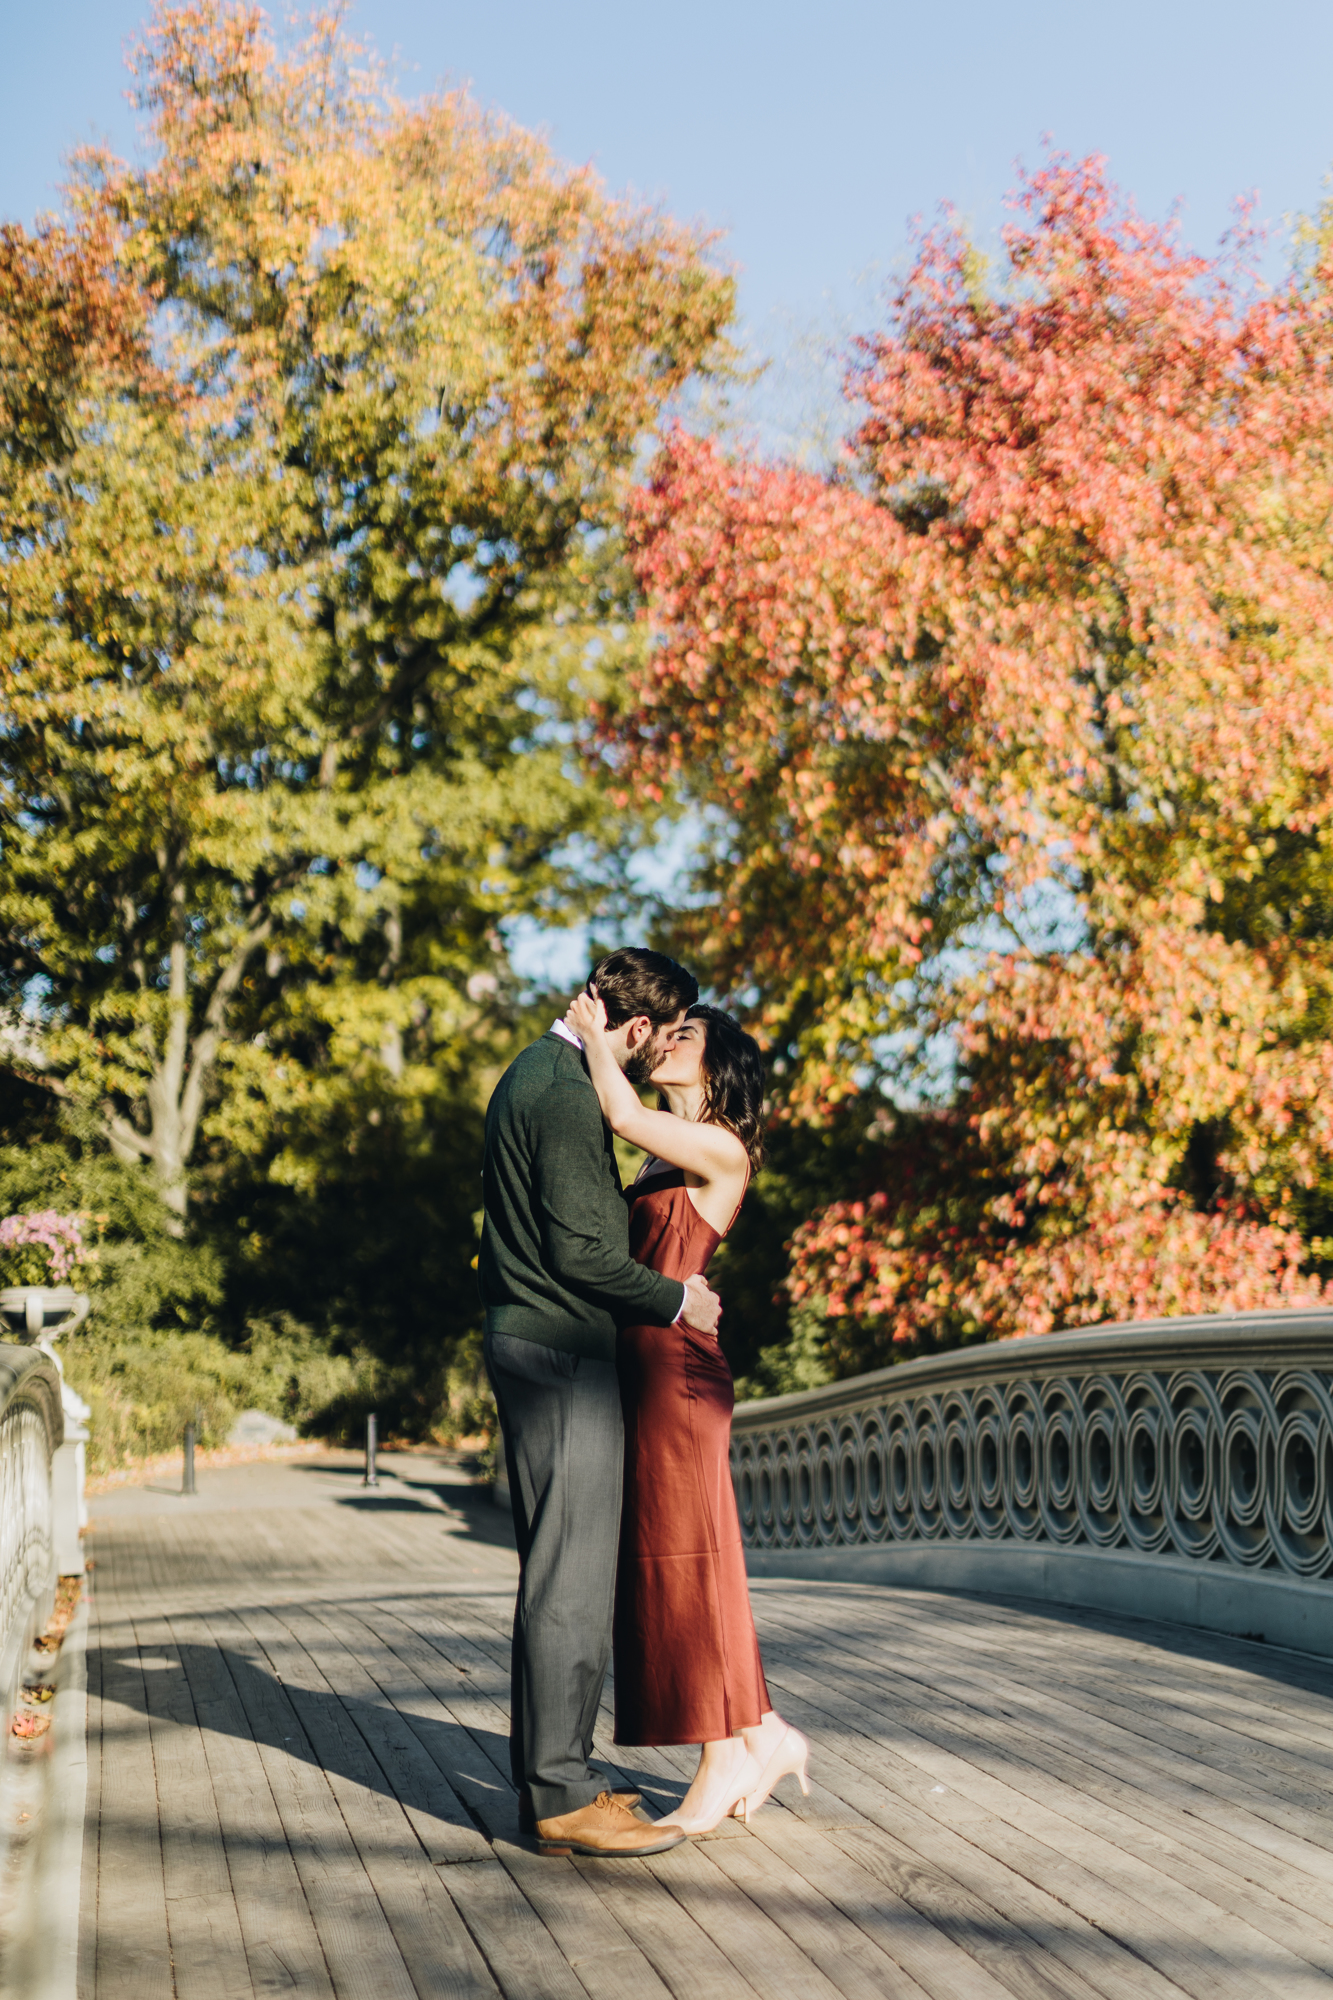 Fantastic Central Park Engagement Photos in Fall